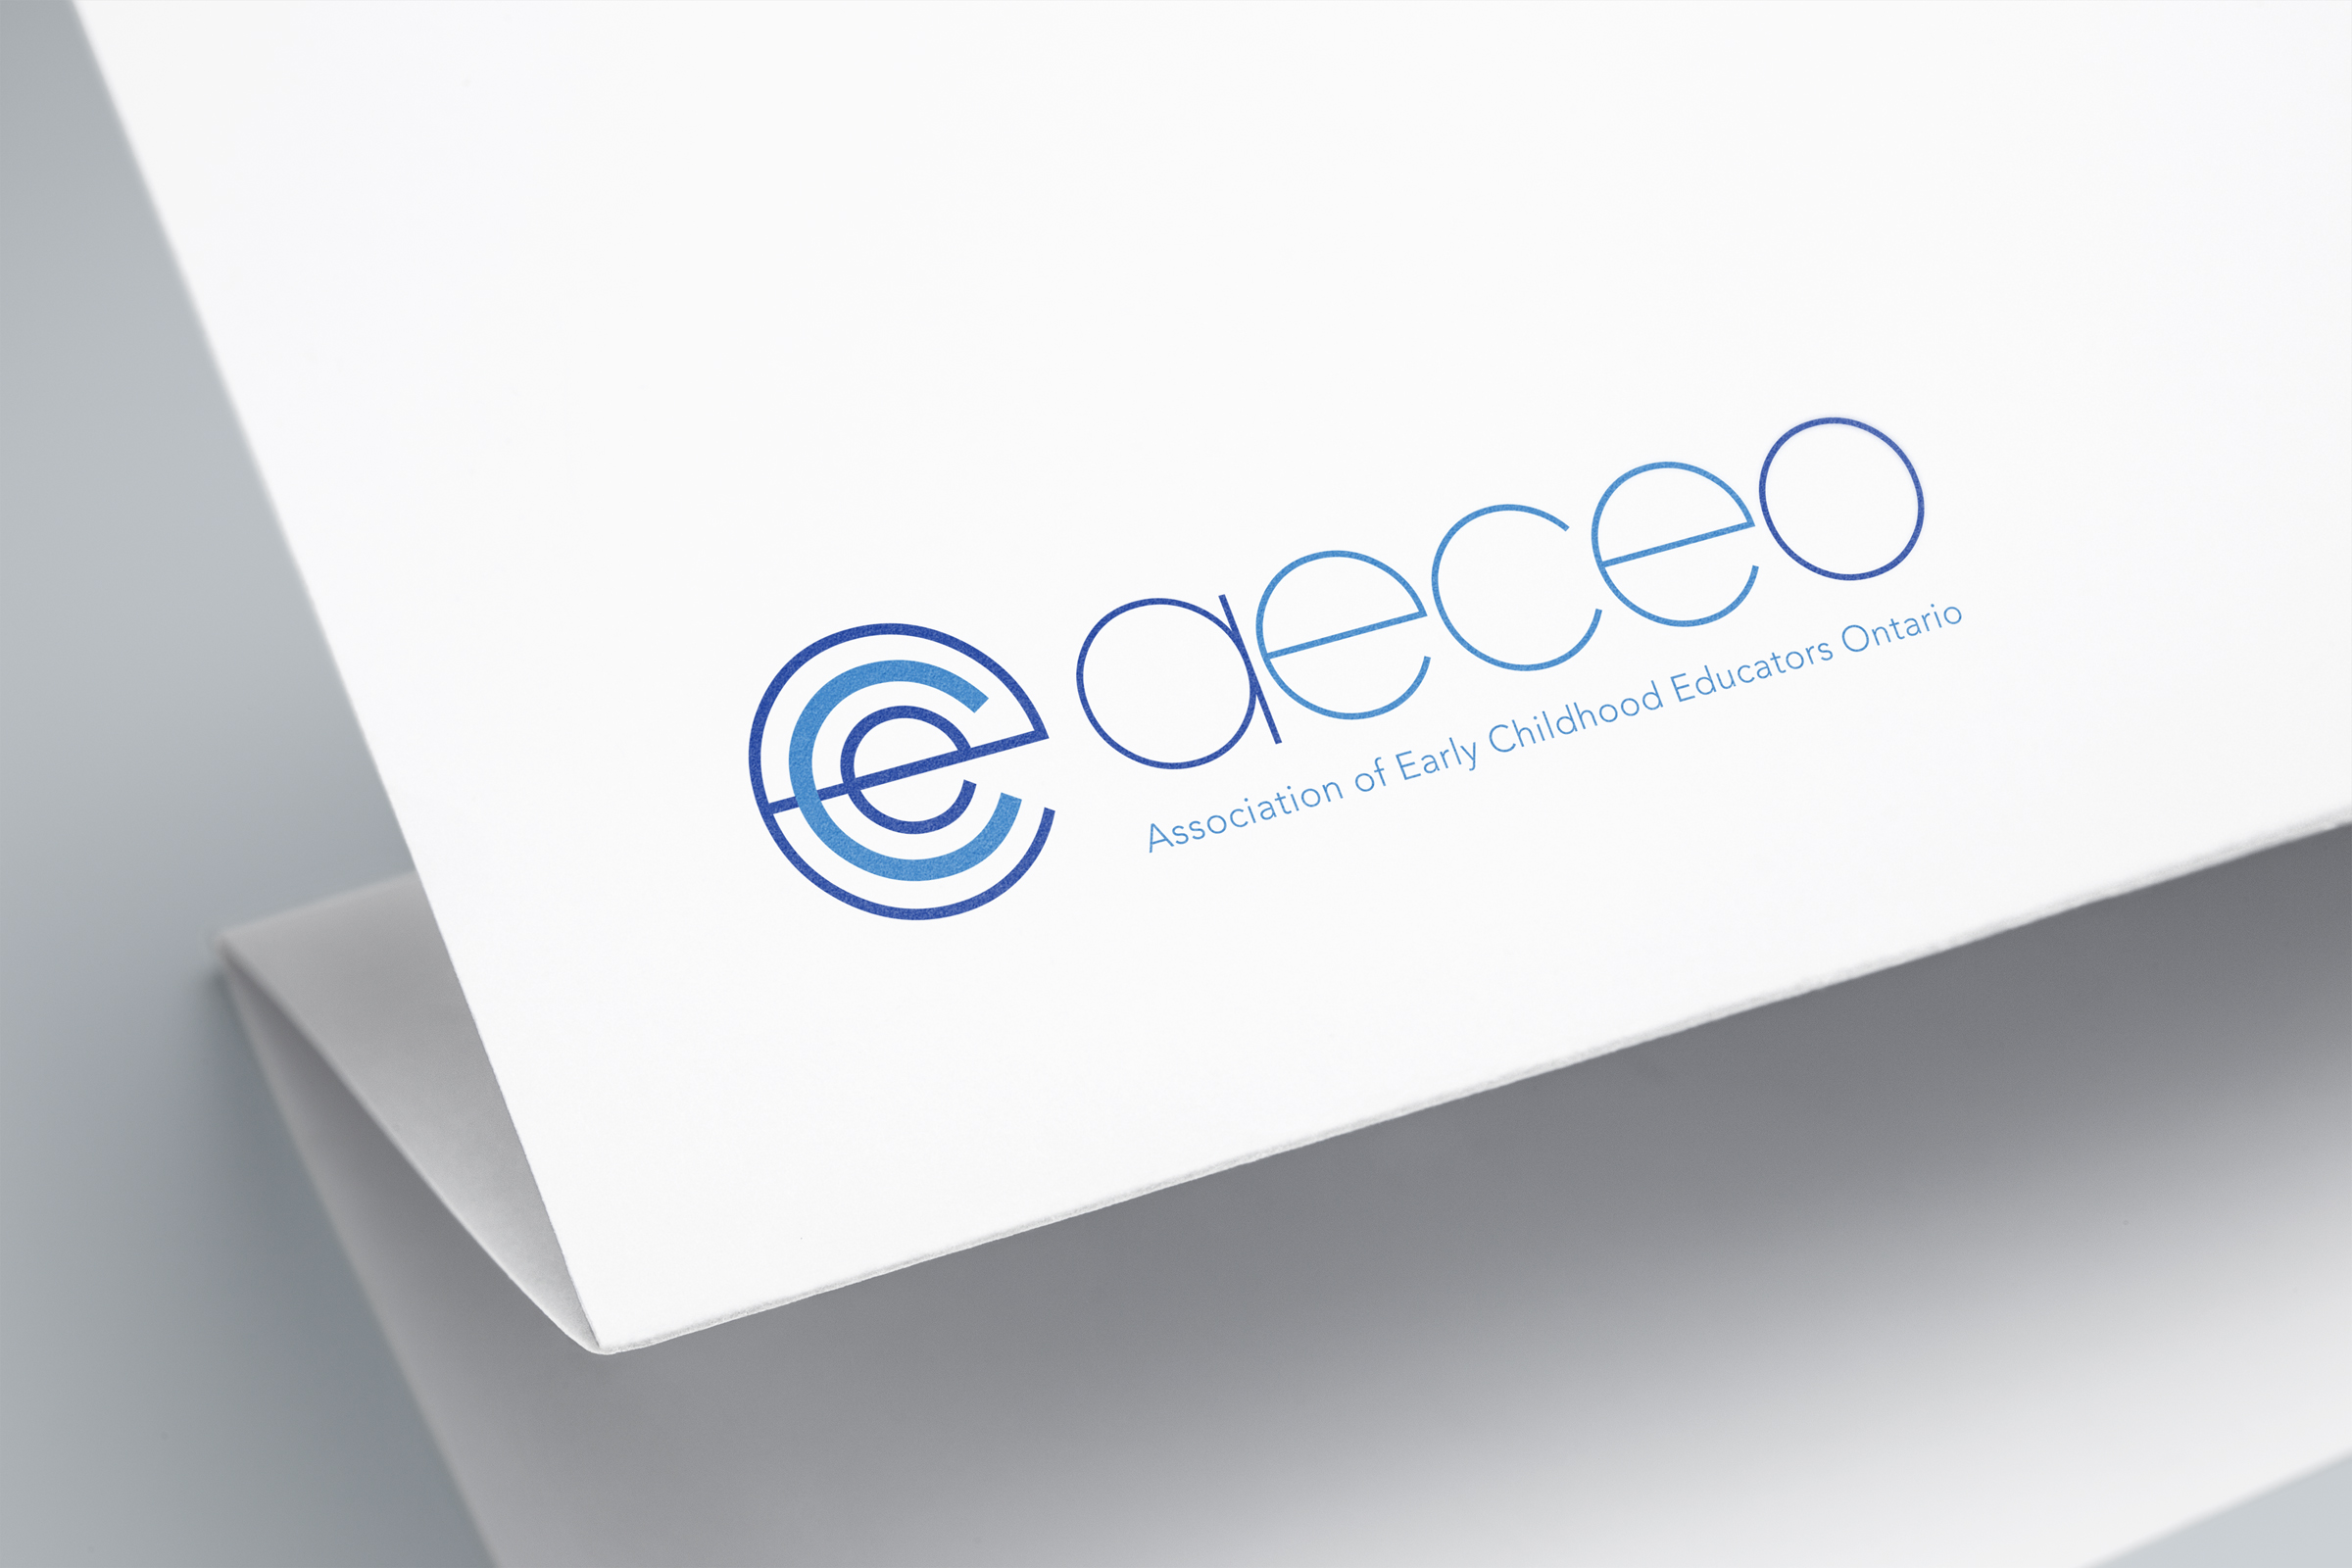 AECEO